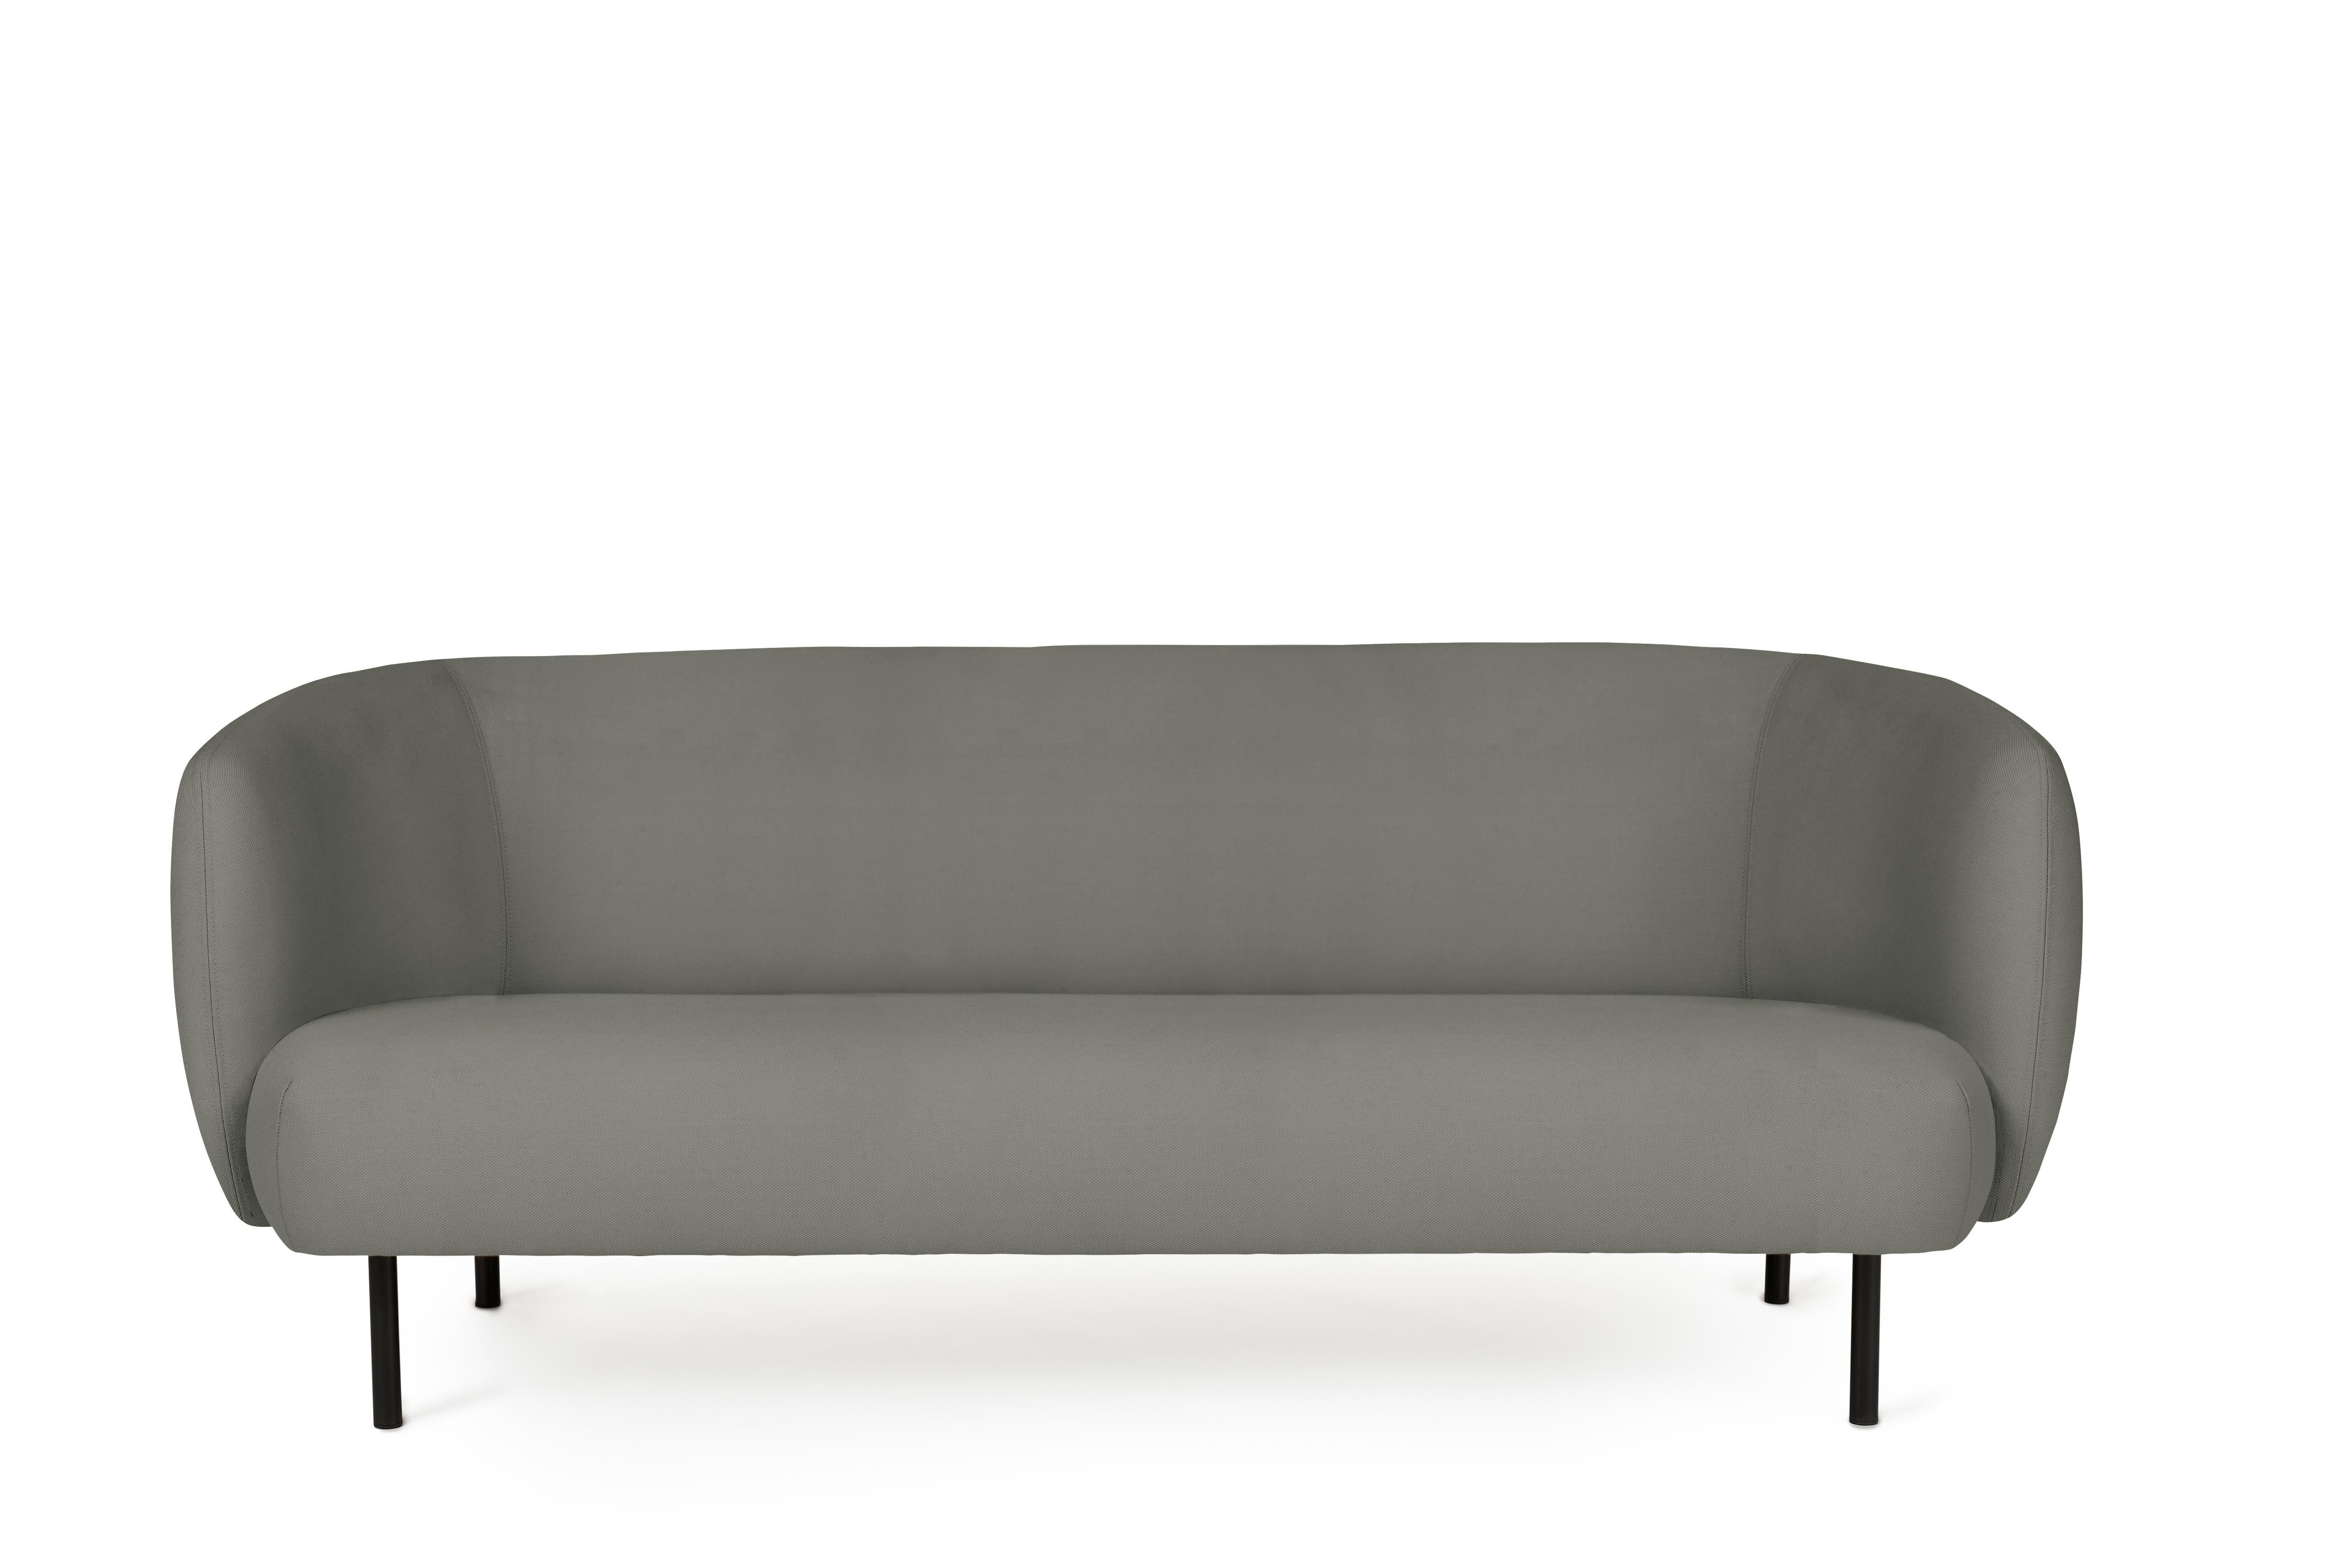 For Sale: Gray (Steelcut 160) Cape 3-Seat Sofa, by Charlotte Høncke from Warm Nordic